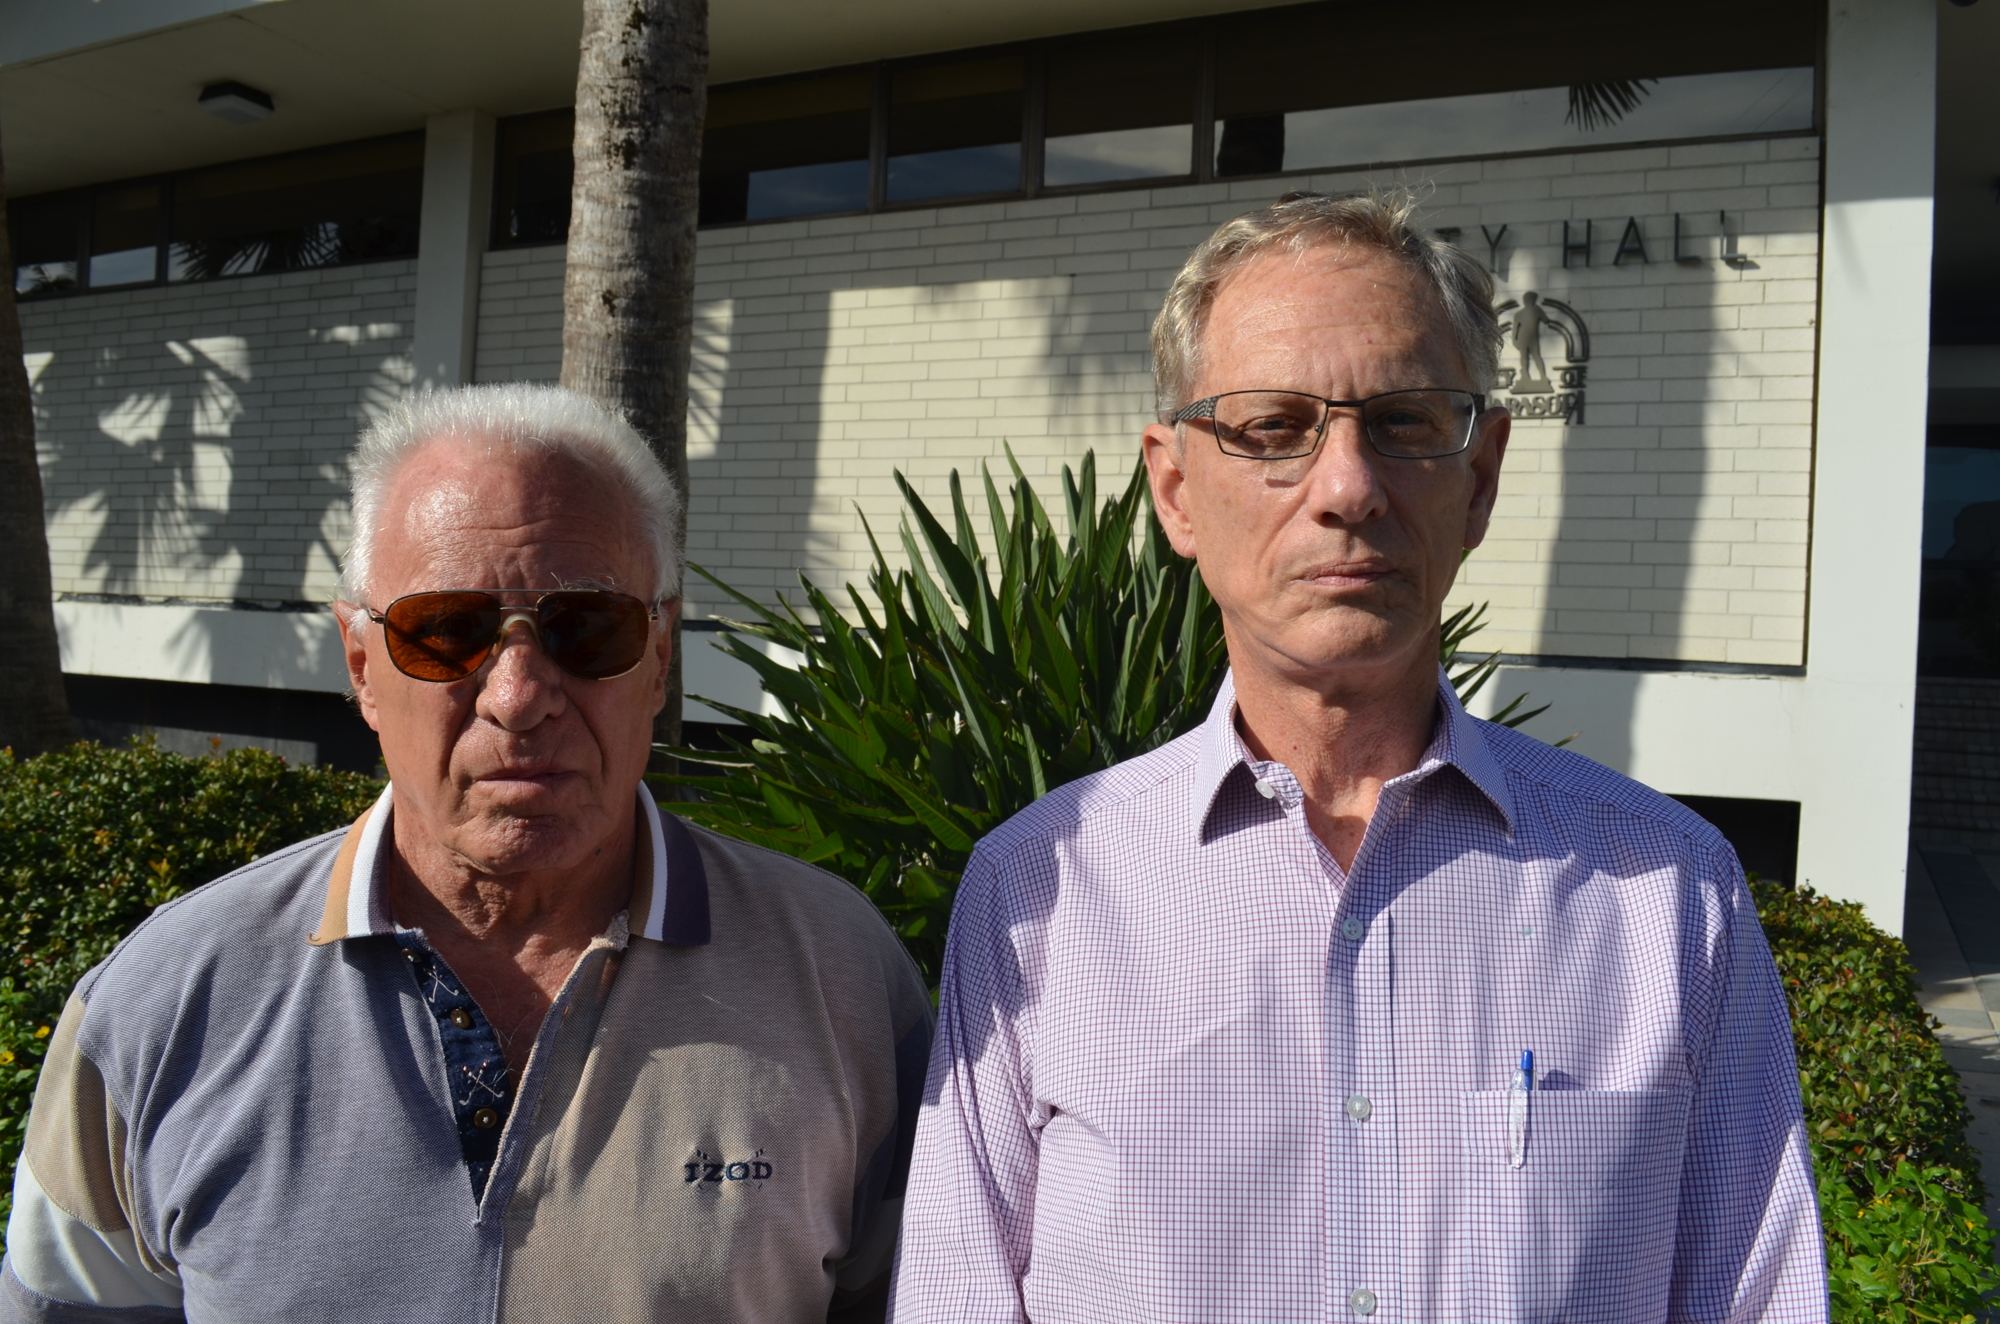 Sarasota residents Lou Dorff and Lou Costa are reaching out to Longboat Key officials in an attempt to address barrier island traffic congestion.